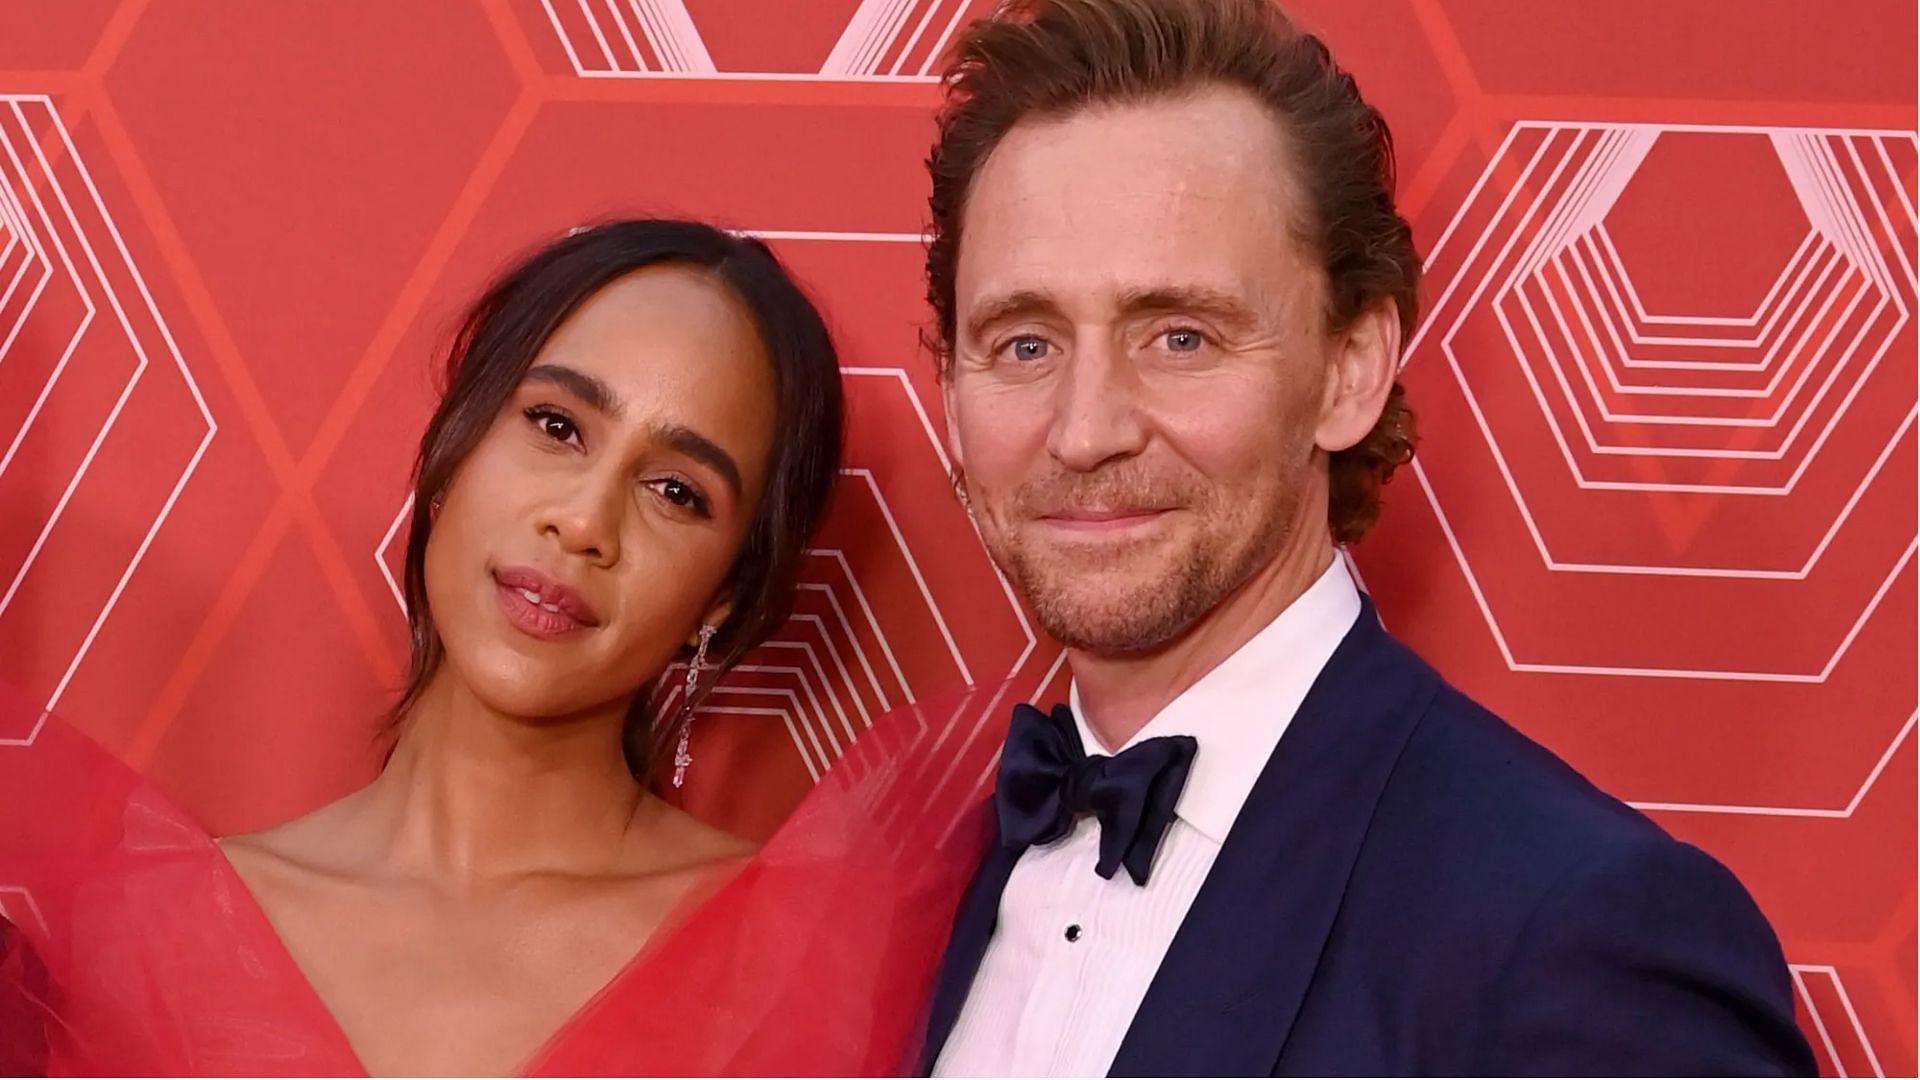 Tom Hiddleston and Zawe Ashton first met each other while doing a Broadway play in 2019. (Image via Getty Images/Bryan Bedder)